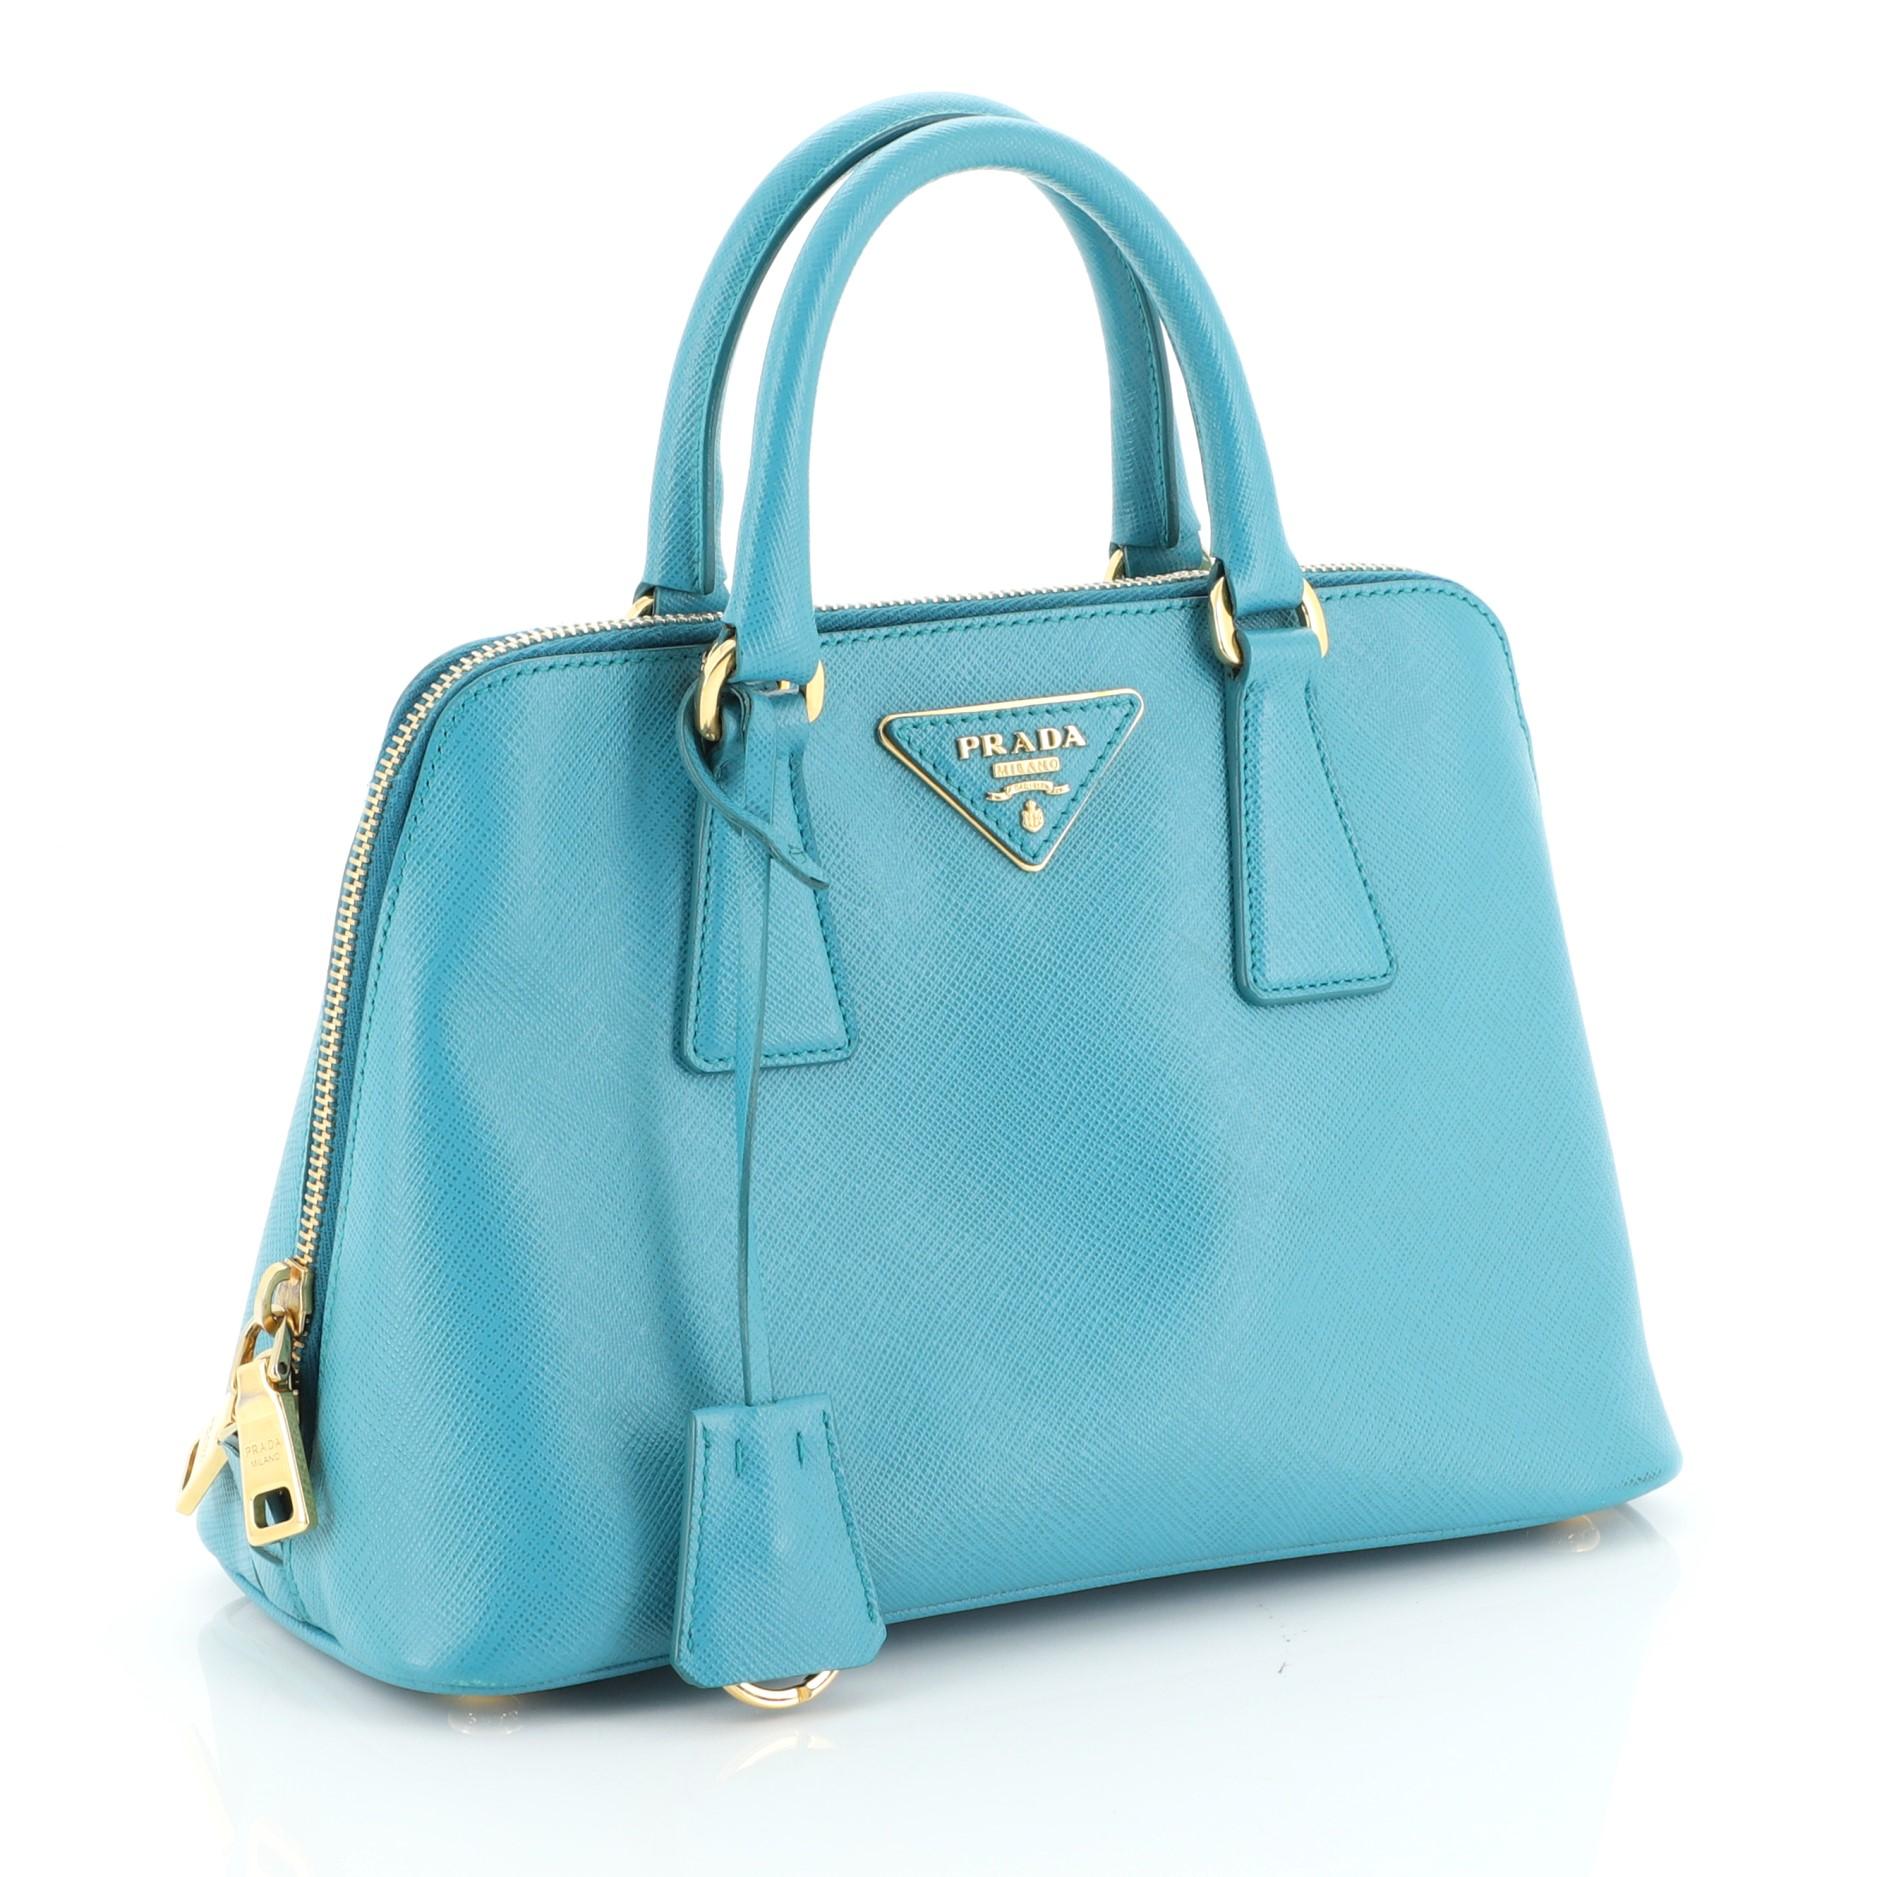 This Prada Promenade Bag Saffiano Leather Small, crafted from blue saffiano leather, features dual rolled handles, triangle Prada logo, and gold-tone hardware. Its two-way zip closure opens to a blue fabric interior with a center zip compartment and